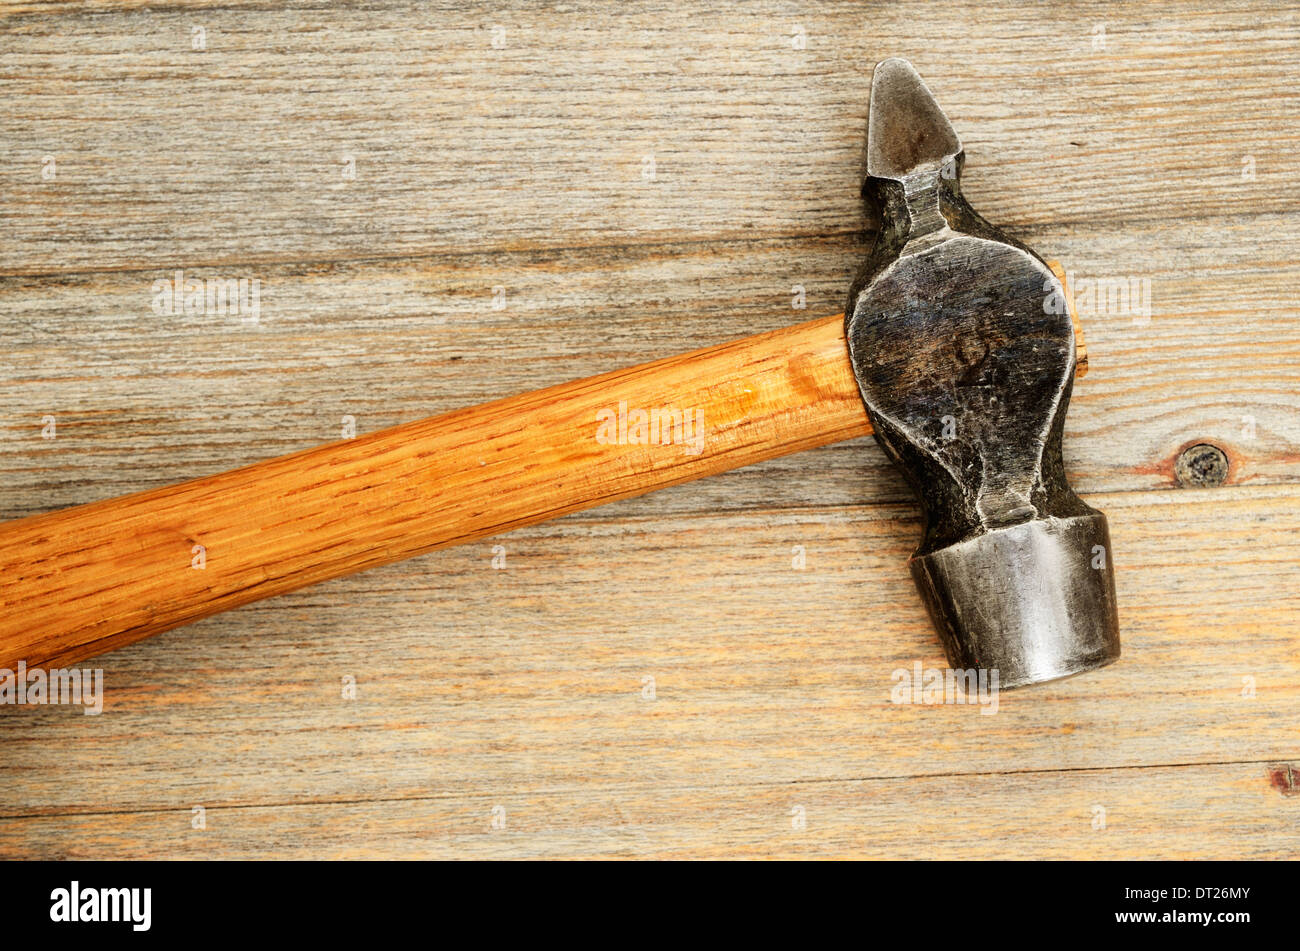 close-up of an old hammer with a wooden handle Stock Photo